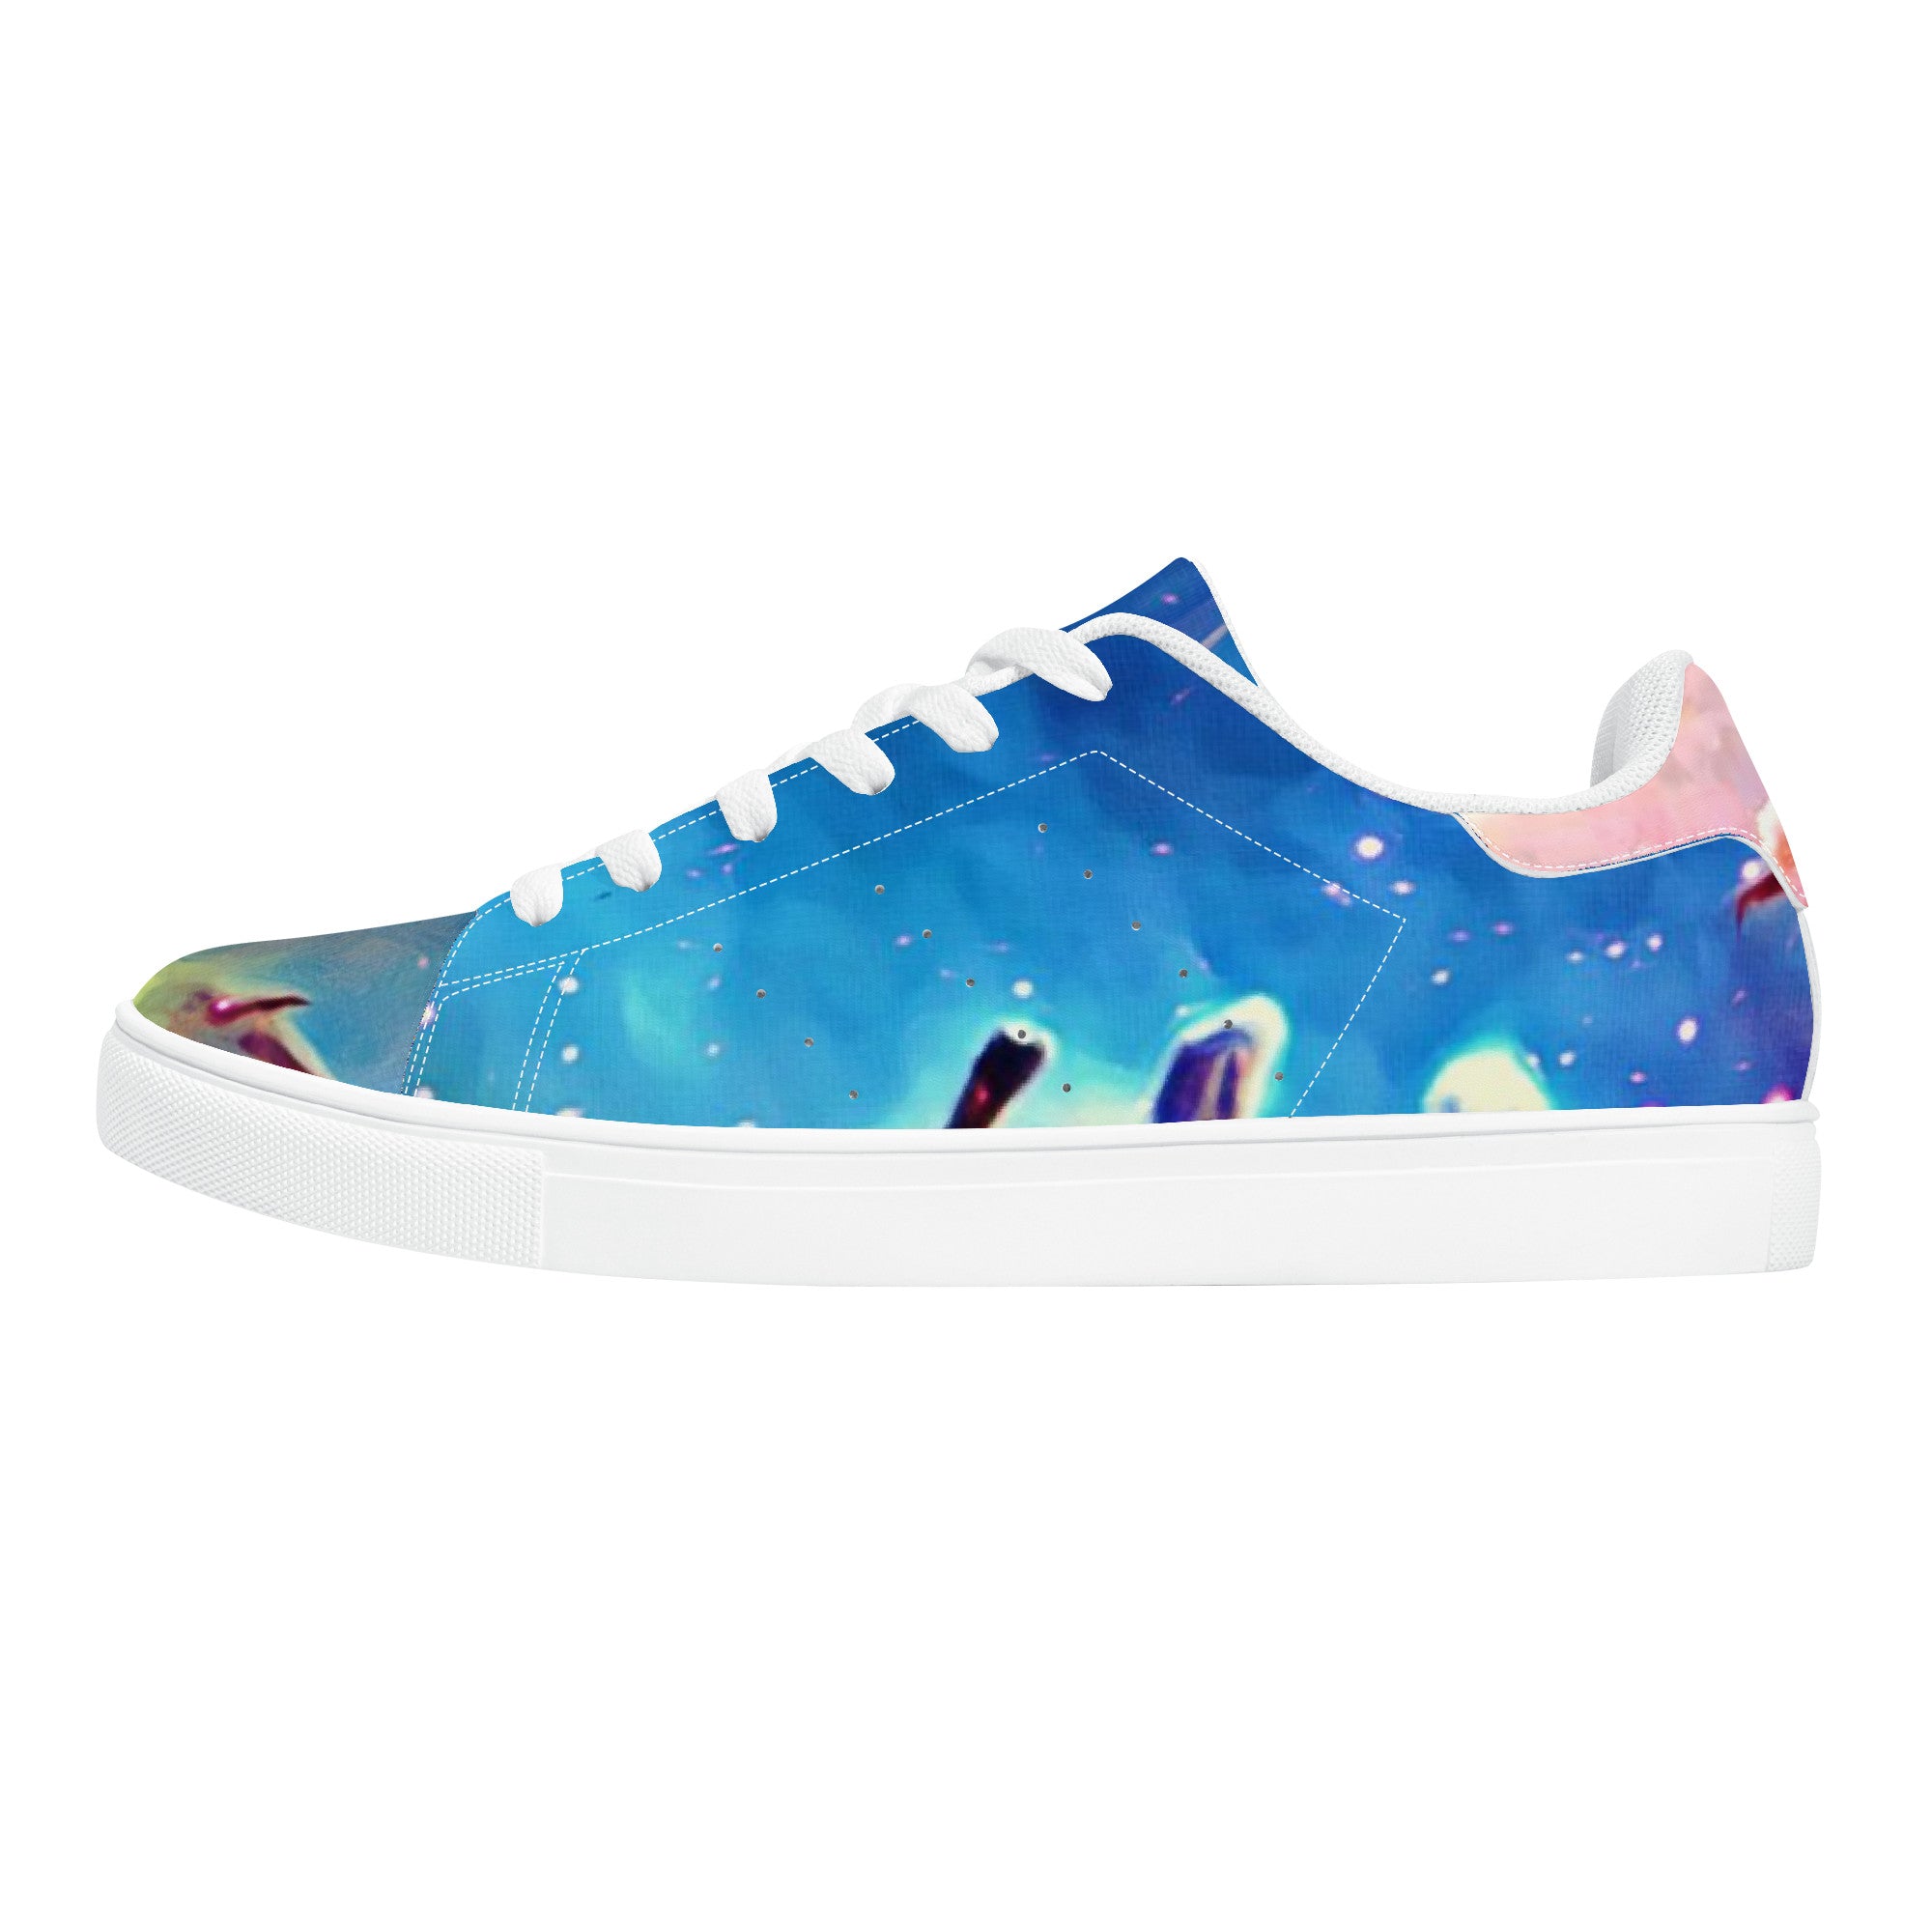 Stars of Creation by Denise Dundon Low-Top Leather Sneakers by Shoe Zero - Shoe Zero